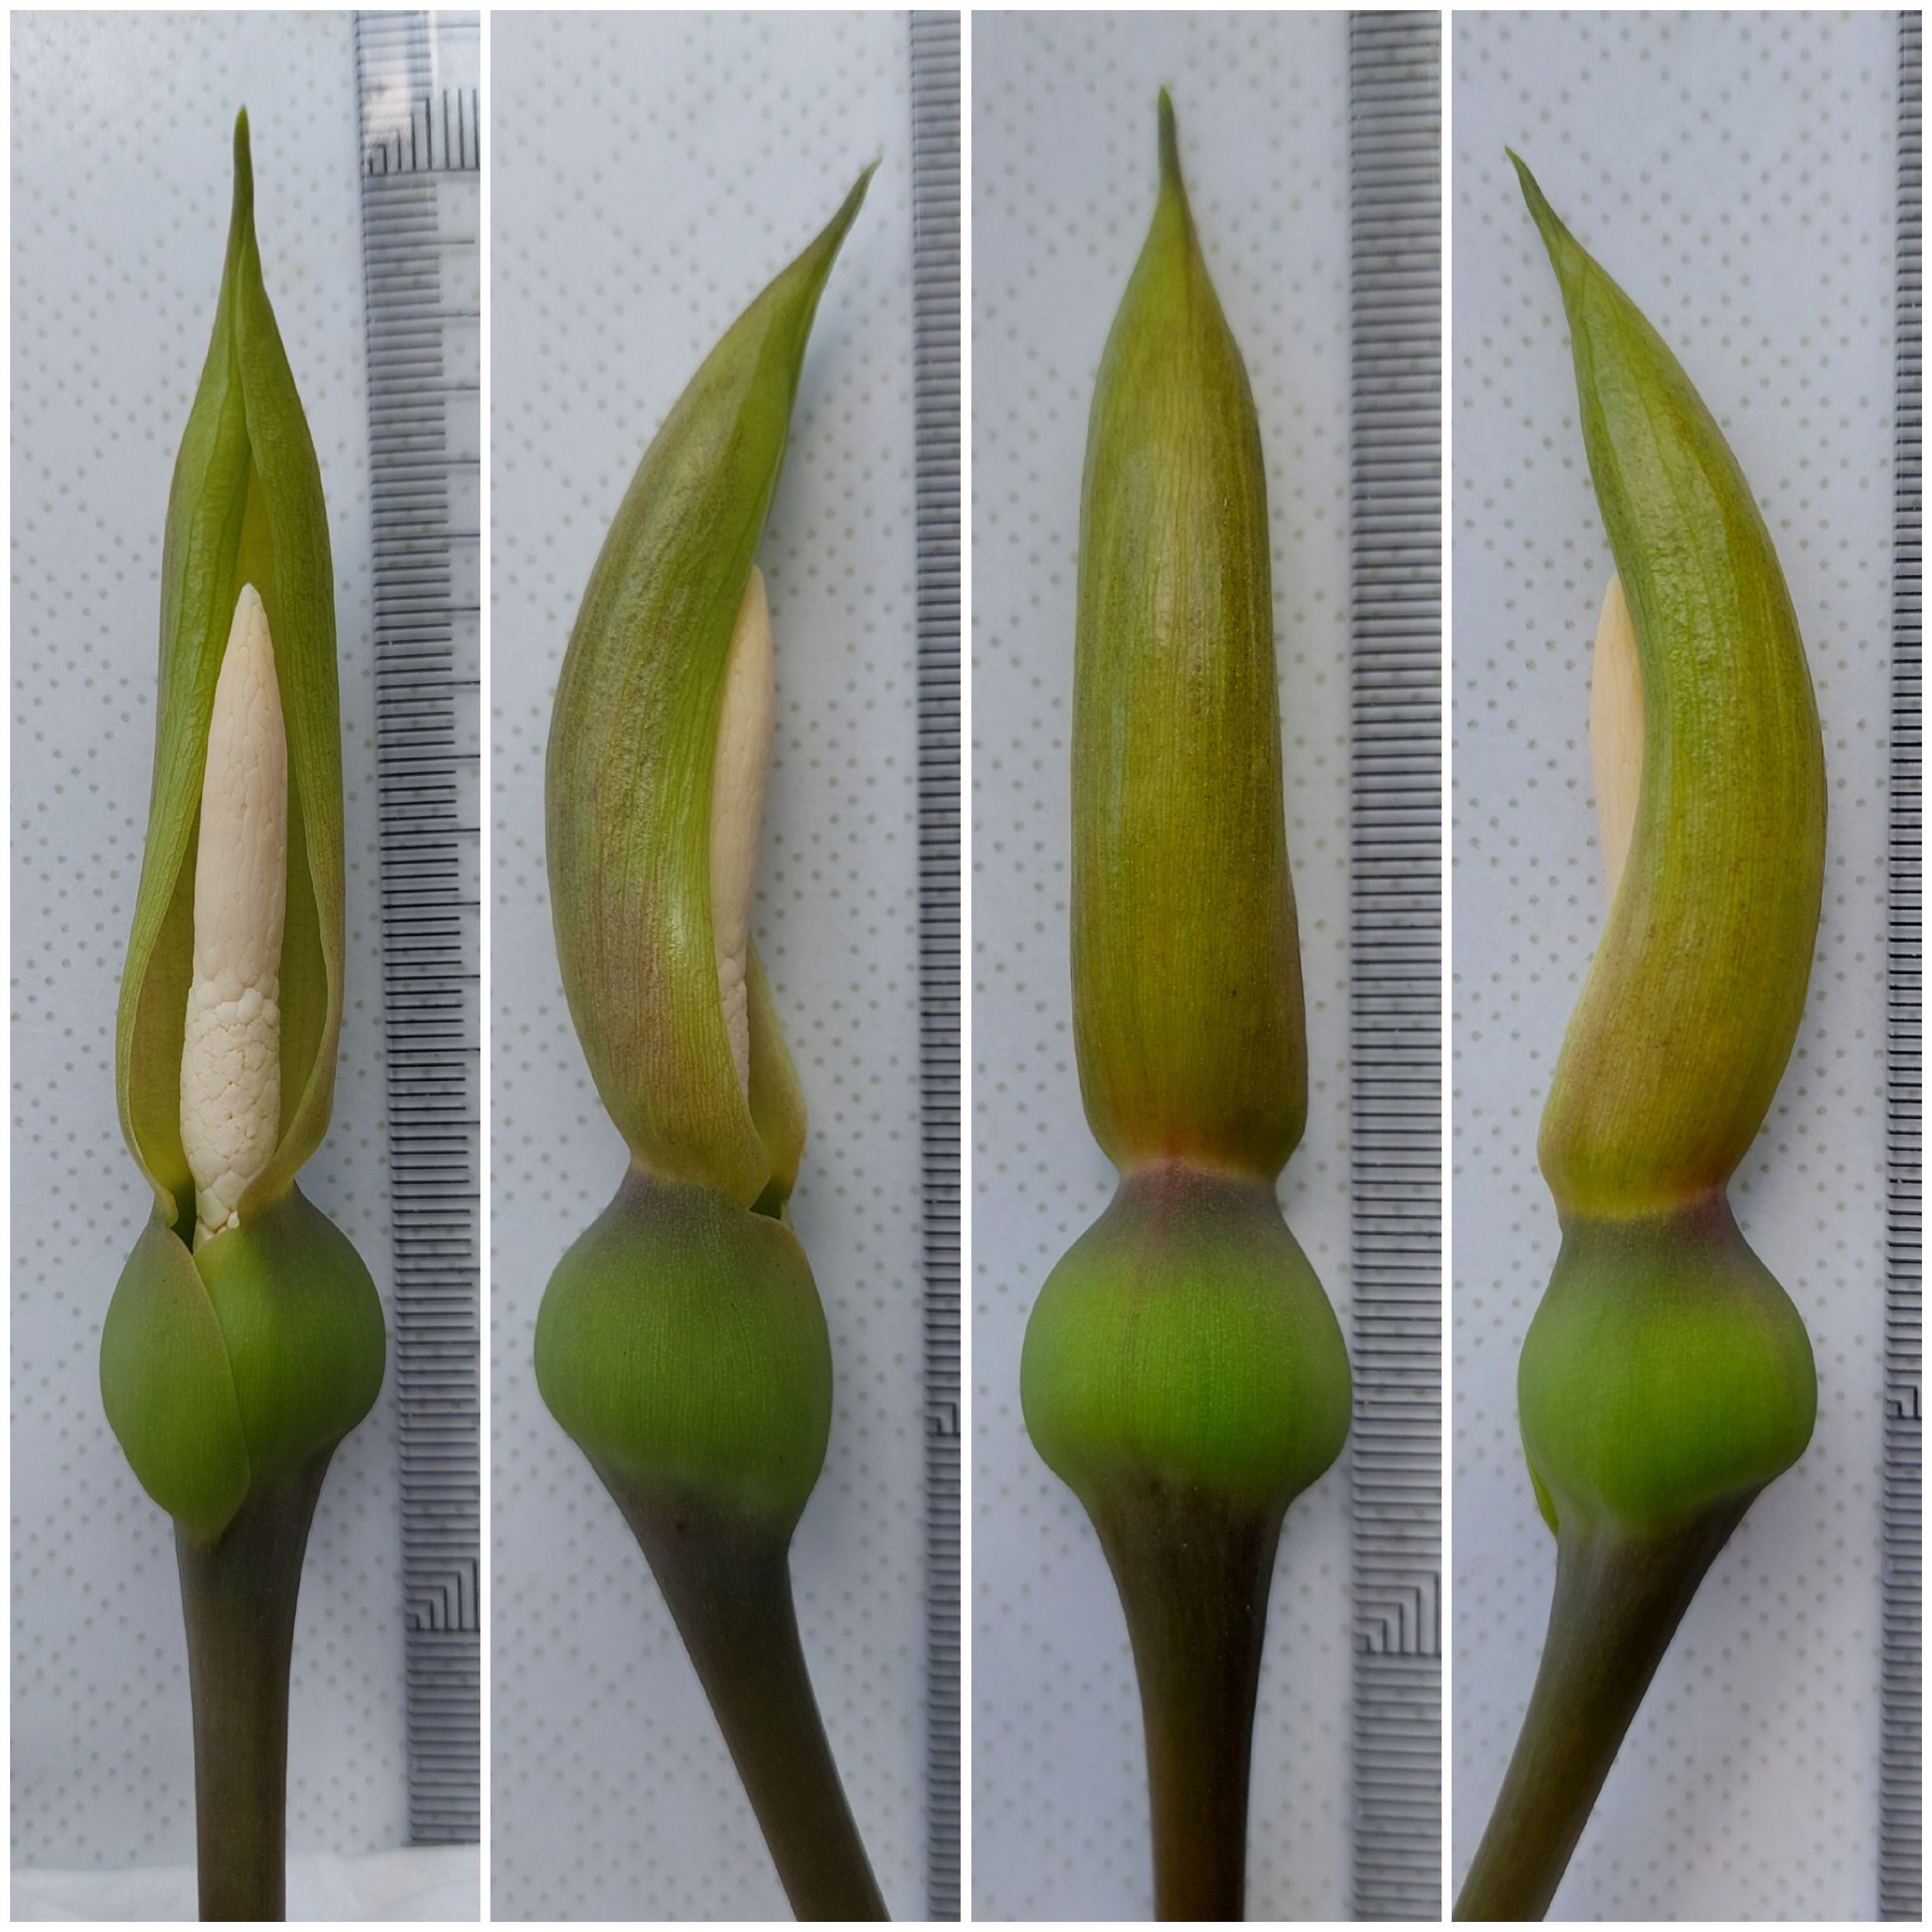 diff. angles of spathe.jpg